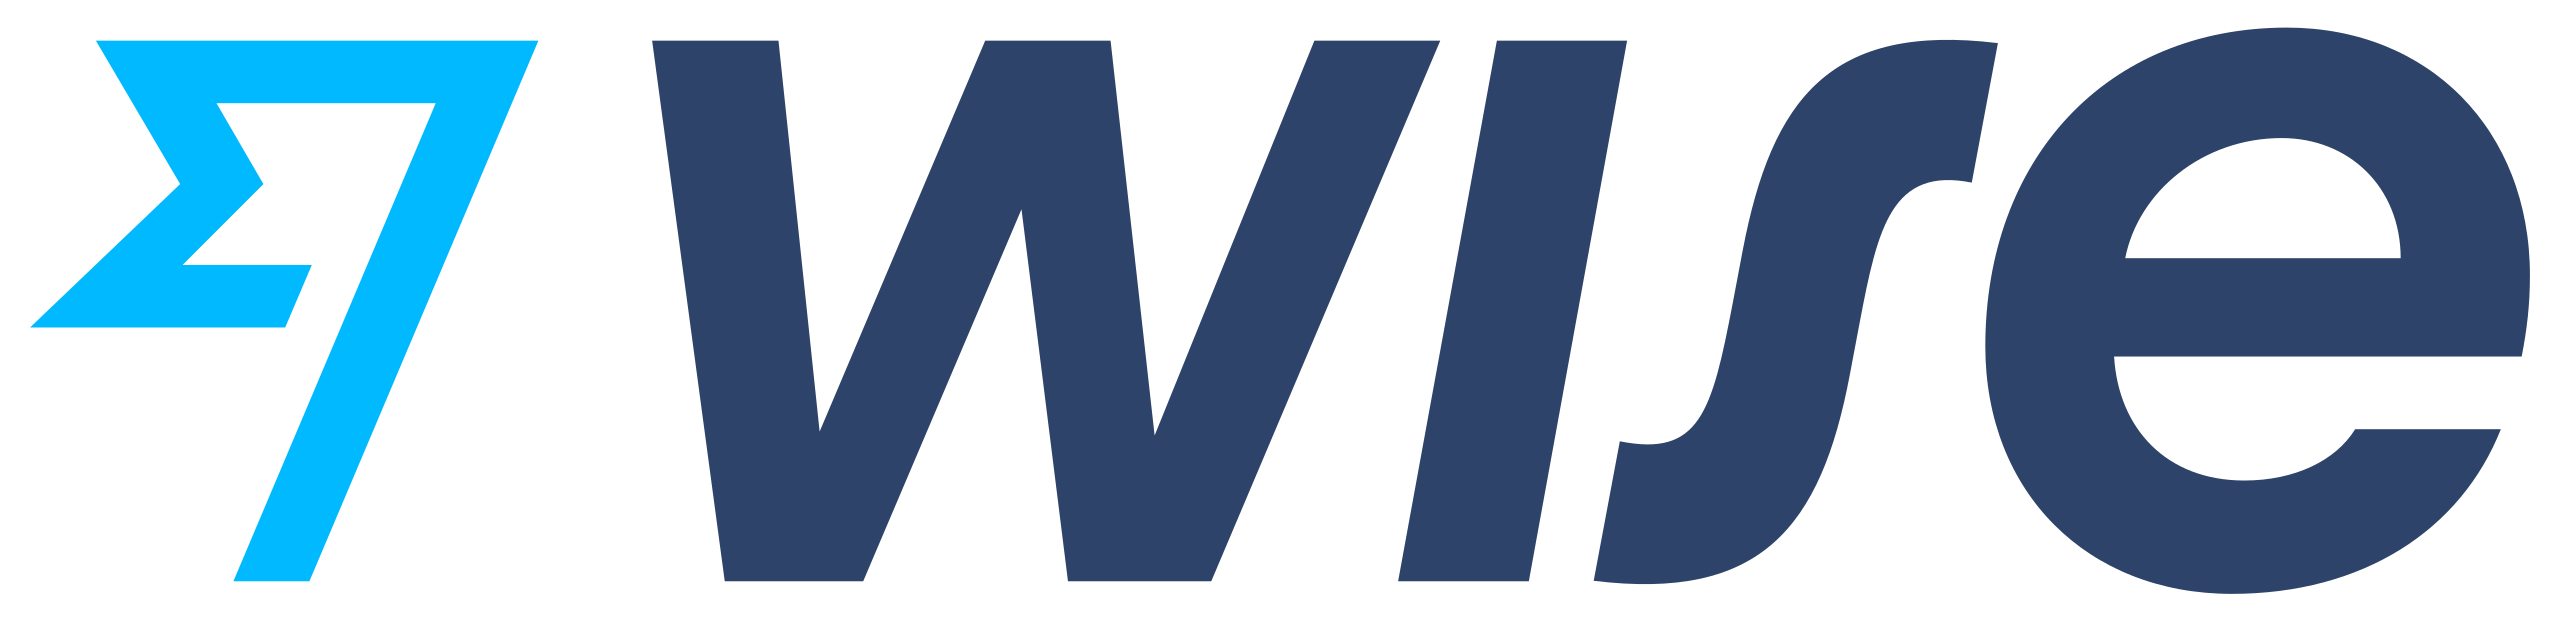 New Wise formerly TransferWise logo.svg 1